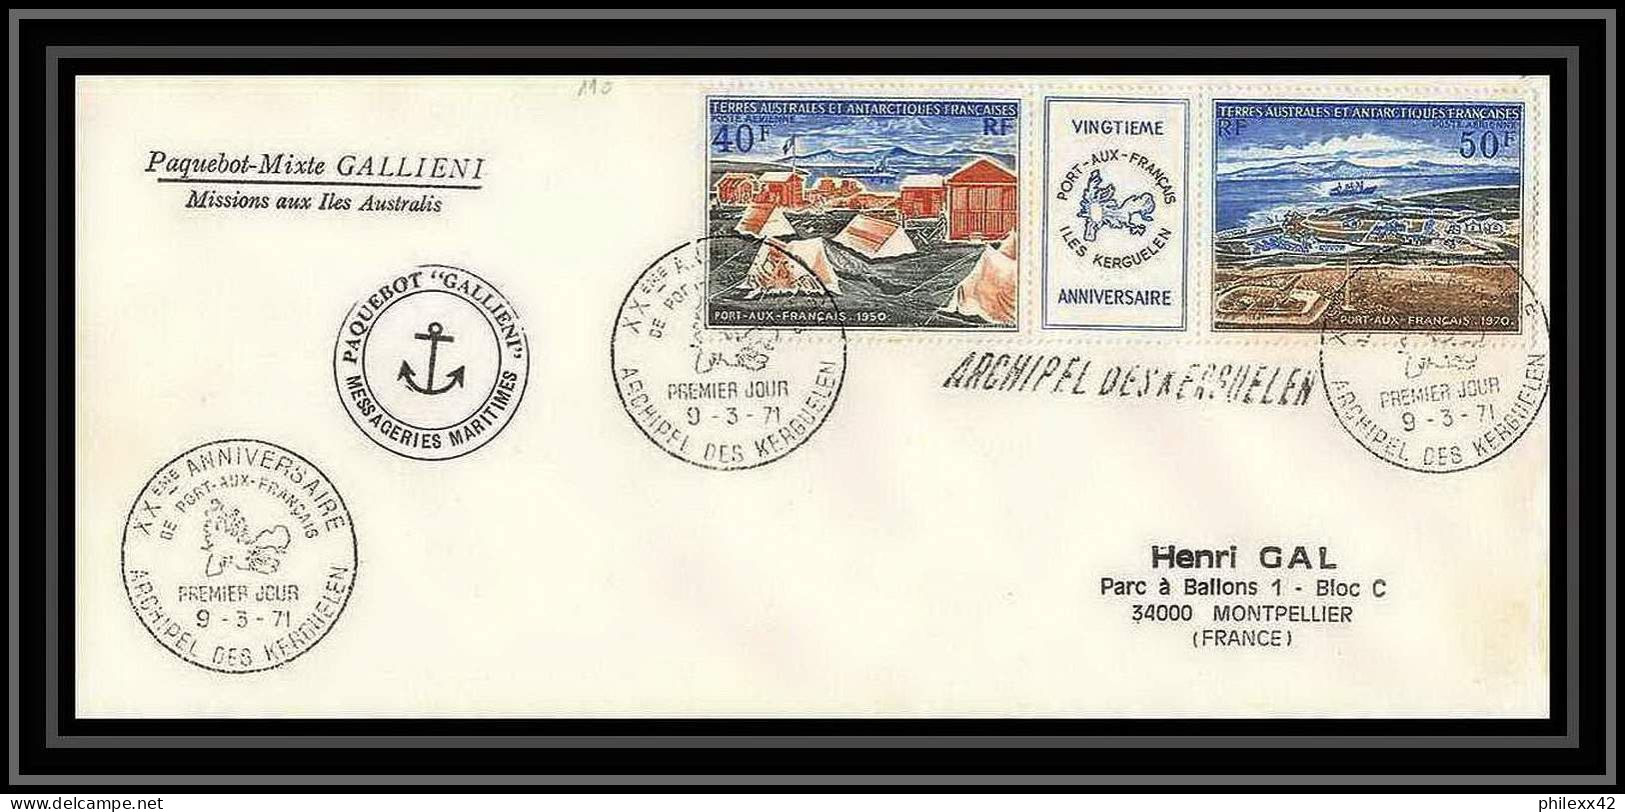 2175 Paquebot Mixte Gallieni 9/3/1971 Pa N°26A TAAF Antarctic Terres Australes Lettre (cover) - Covers & Documents